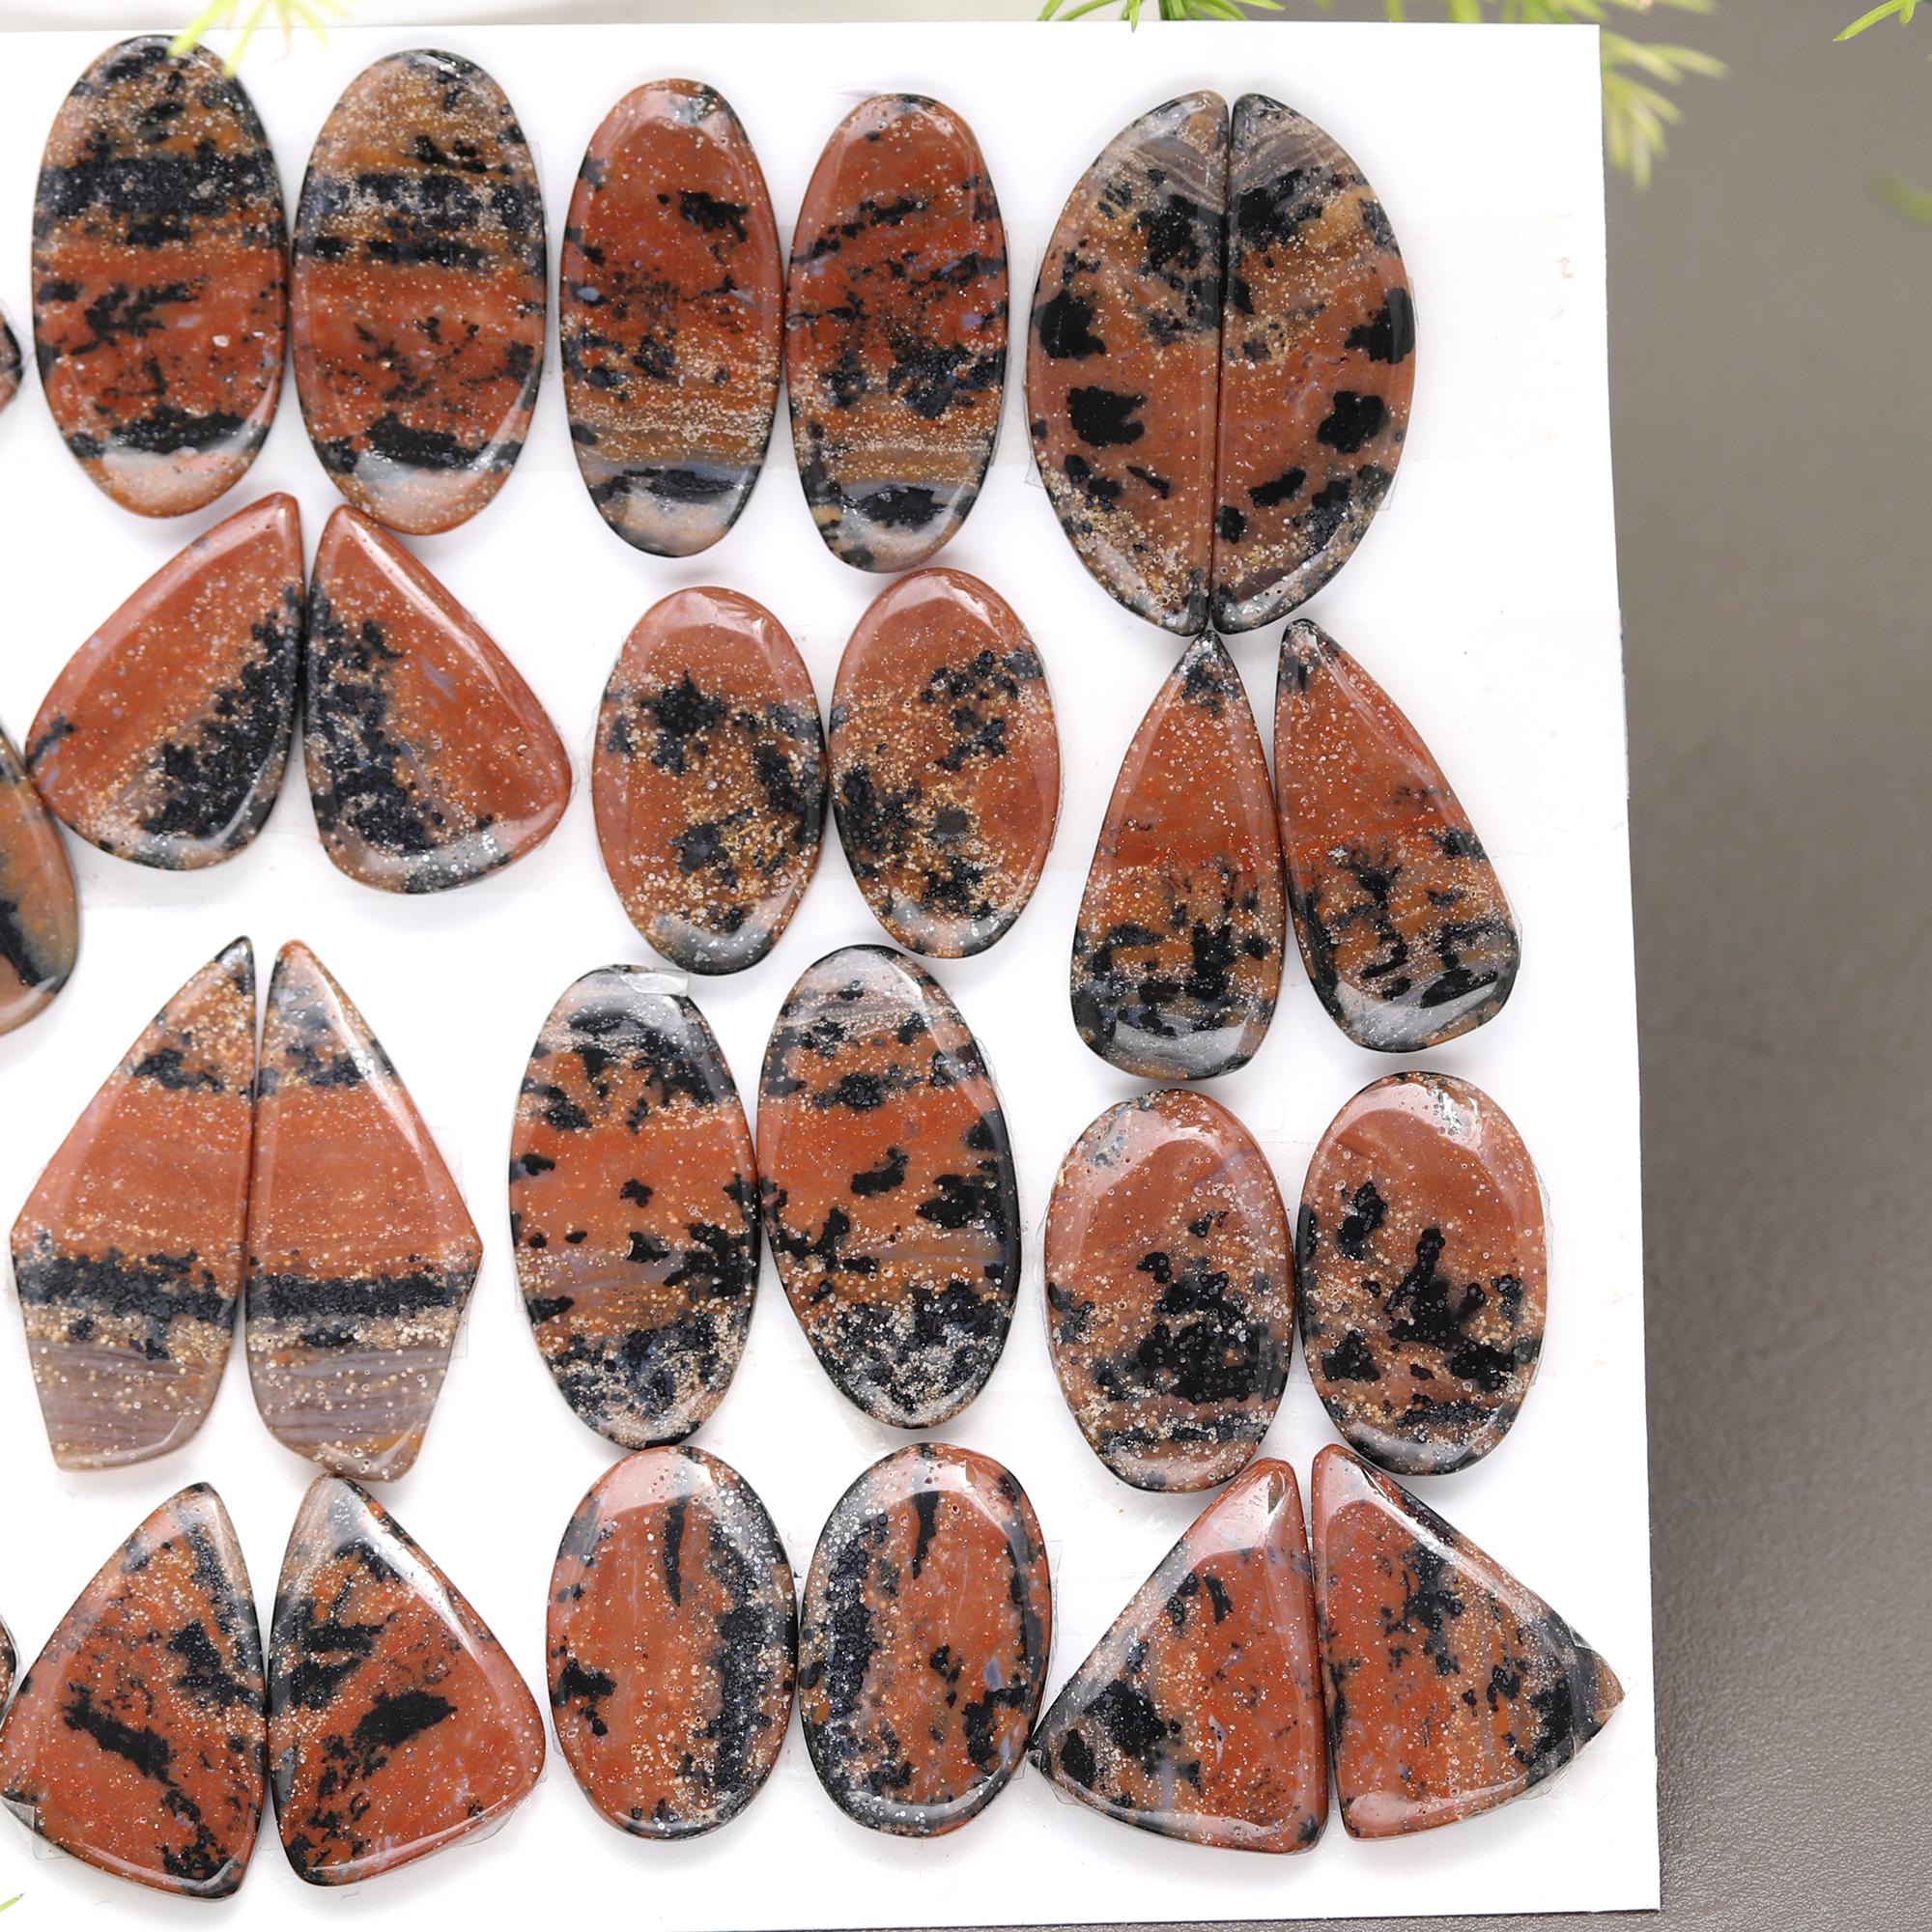 315.Cts 20 Pair Natural Smooth Honey Dendrid Agate Mix Cabochon Loose Gemstone Pair Wholesale Lot Size 24x12 16x10mm